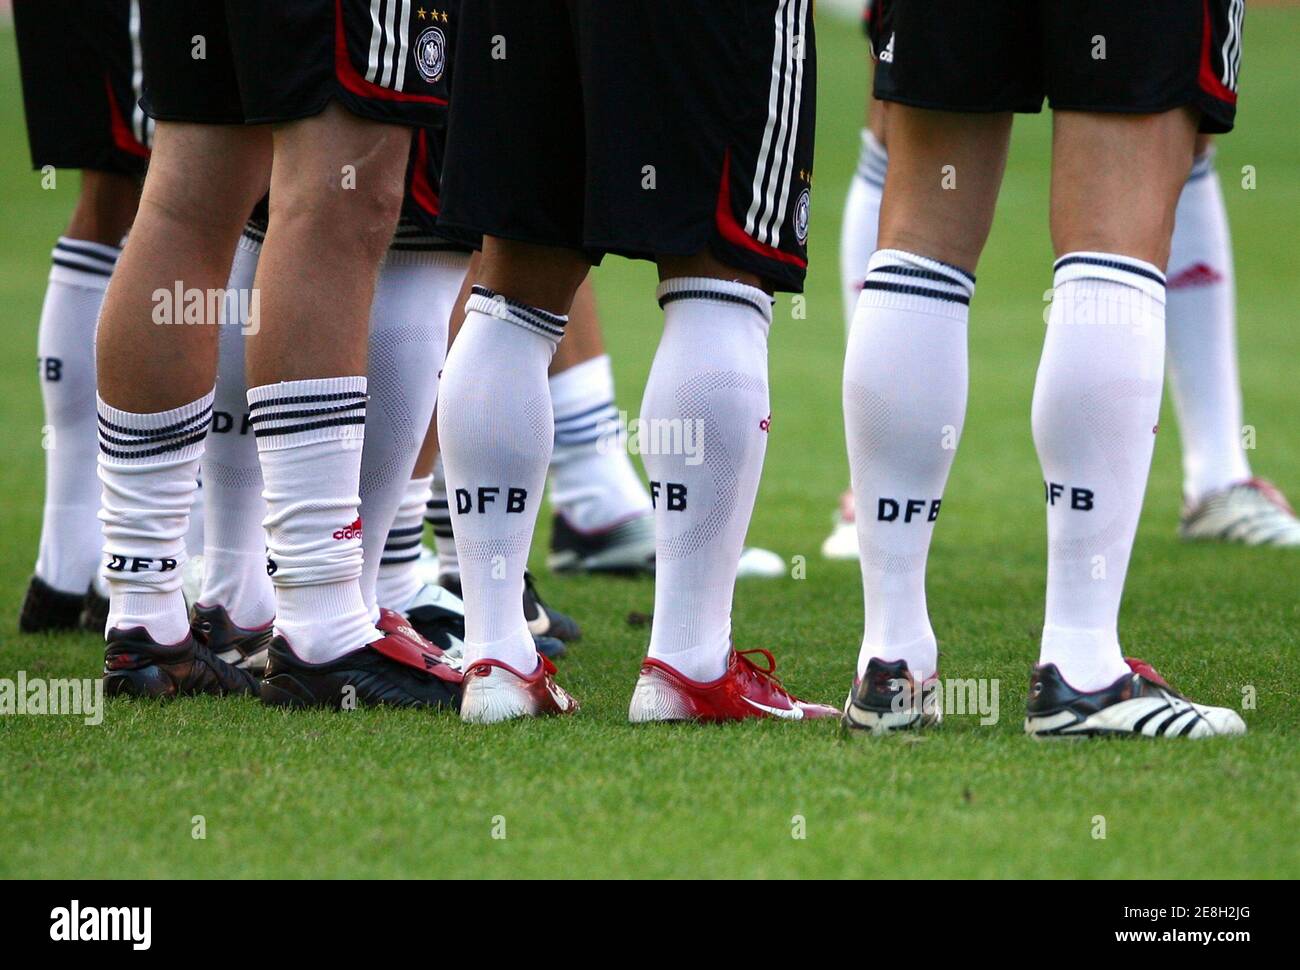 Players wearing Nike and Adidas shoes stand together during a German  national soccer team training session in the southern German city of  Stuttgart September 1, 2006. Germany will face Ireland for their